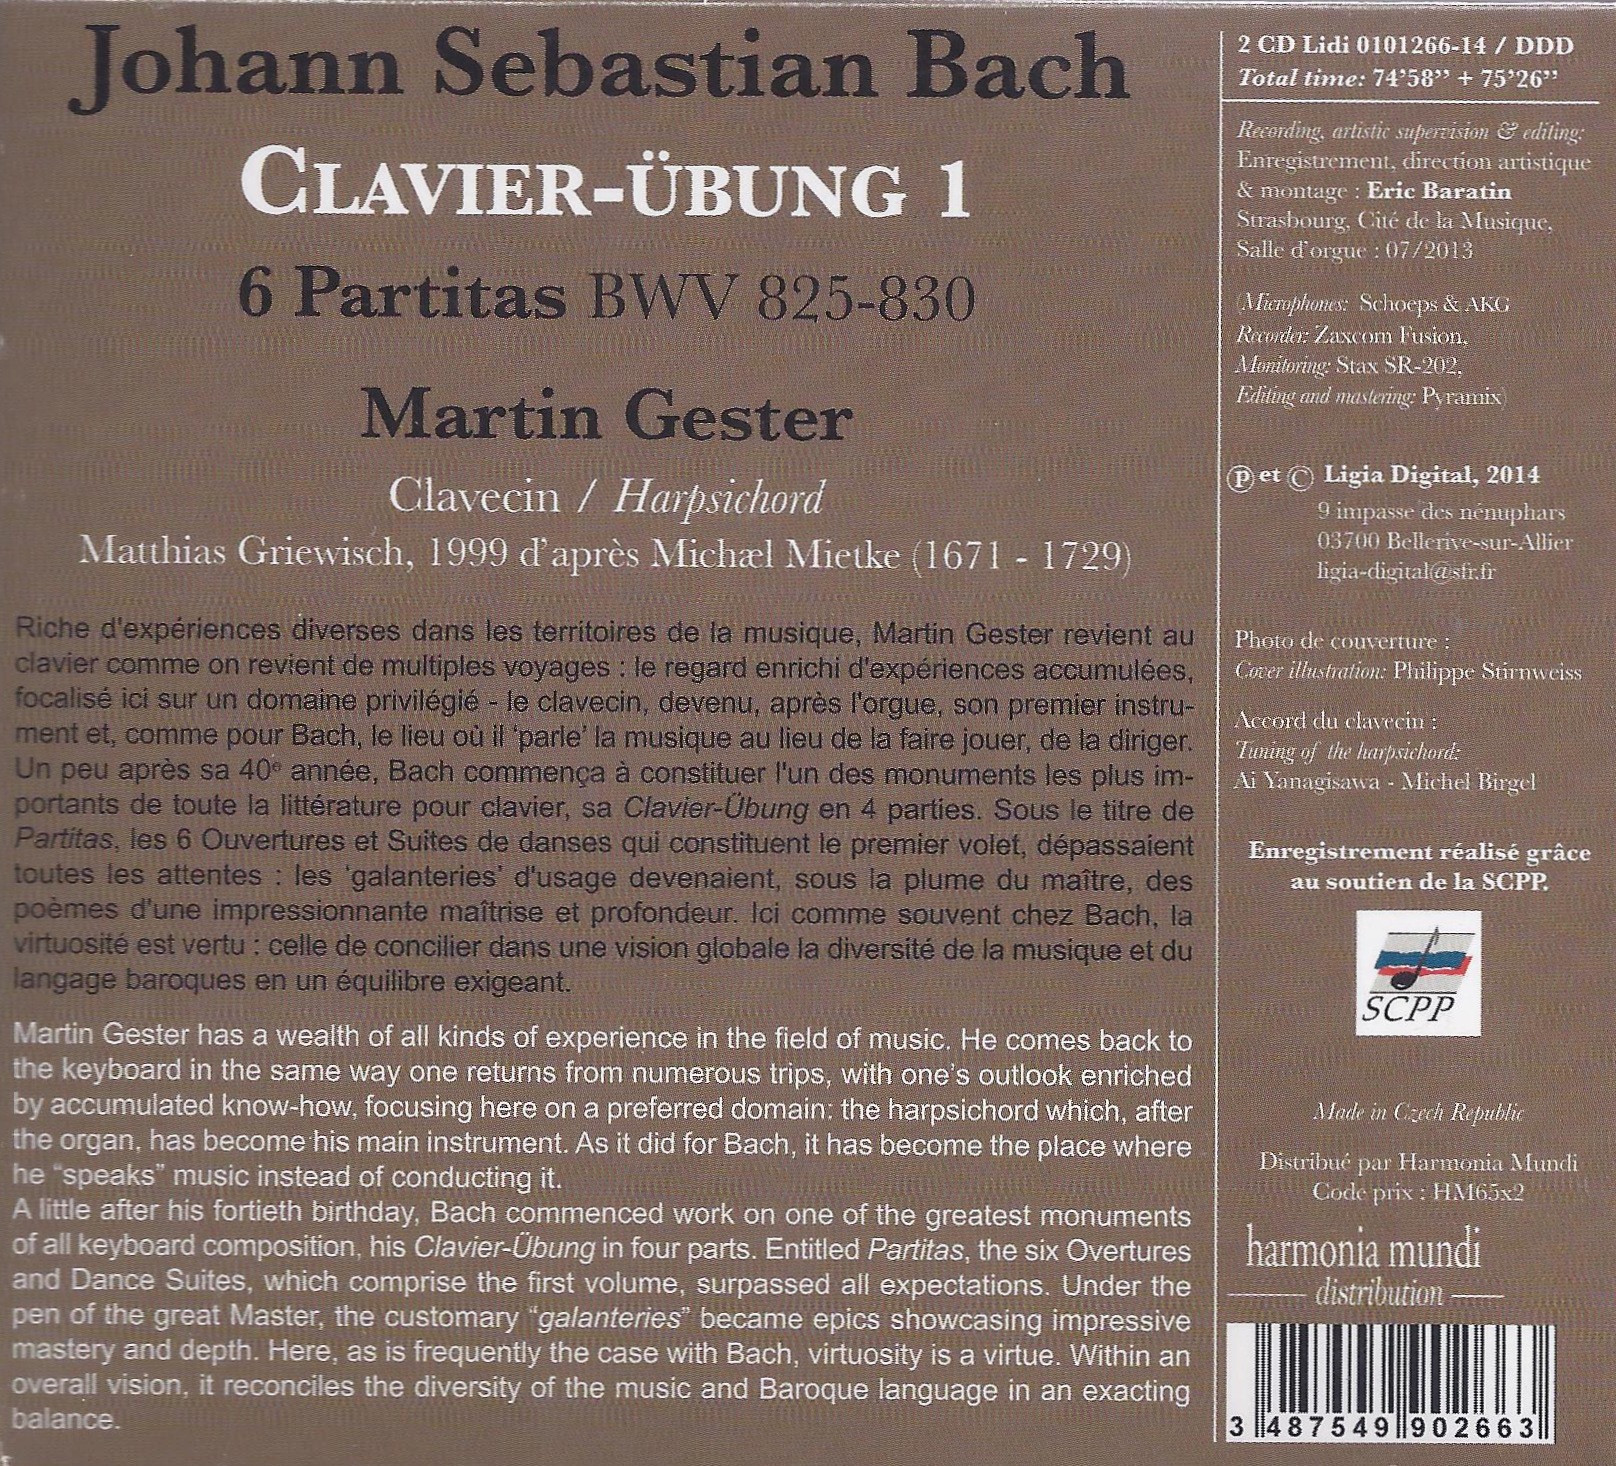 Bach: Clavier ubung 1 - slide-1